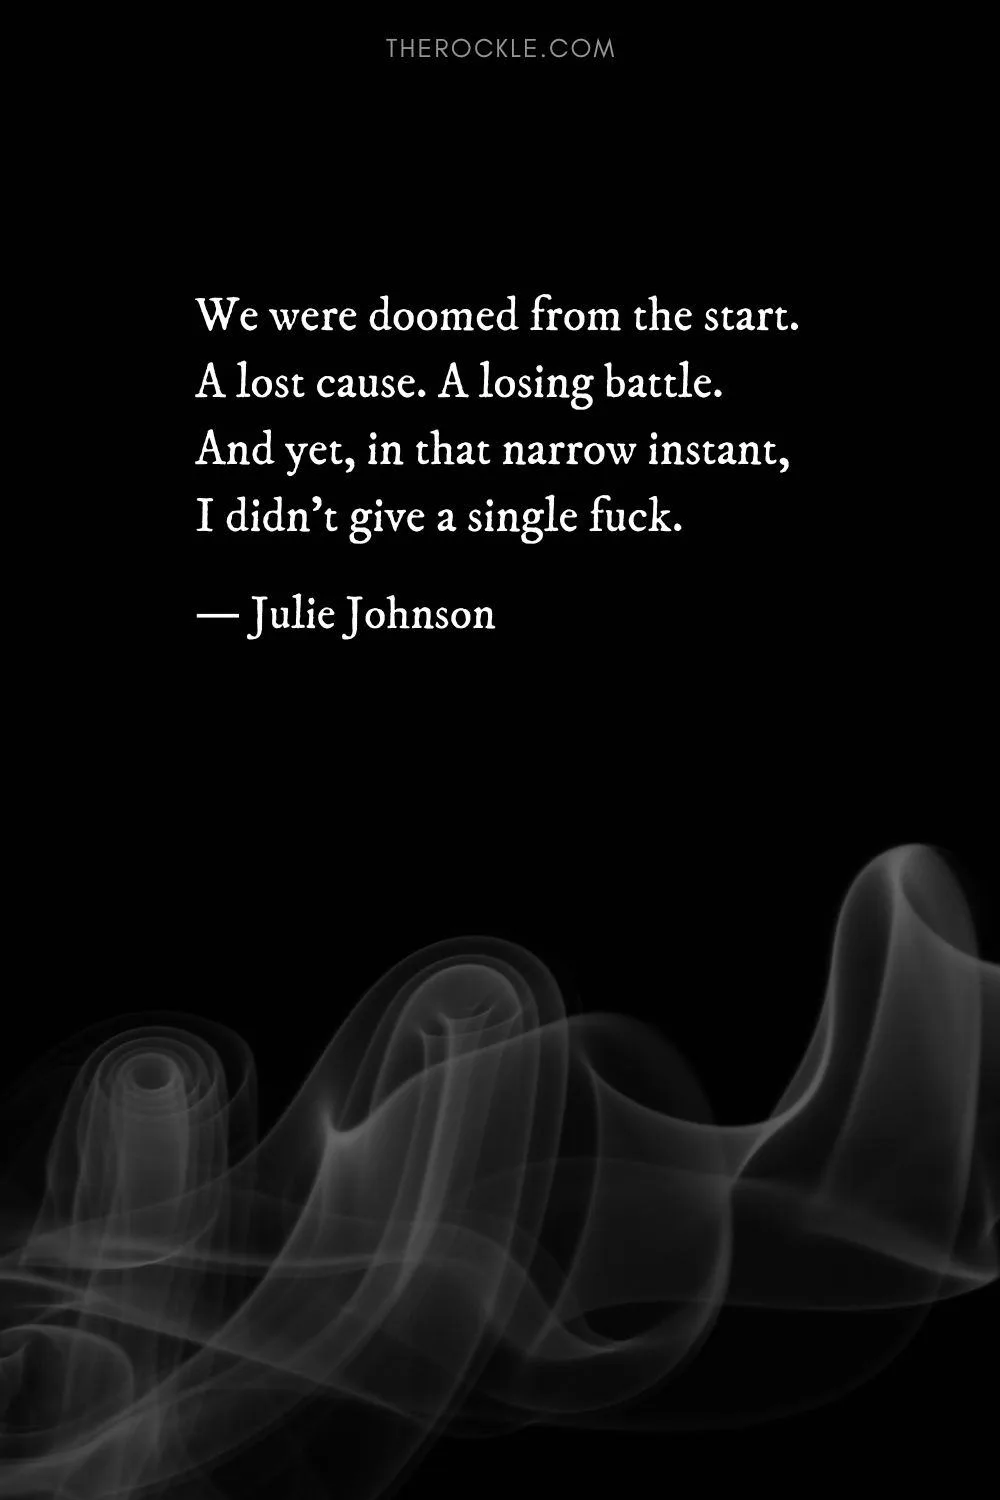 Julie Johnson's dark quote about doomed love: “We were doomed from the start. A lost cause. A losing battle. And yet, in that narrow instant, I didn't give a single f―k.”